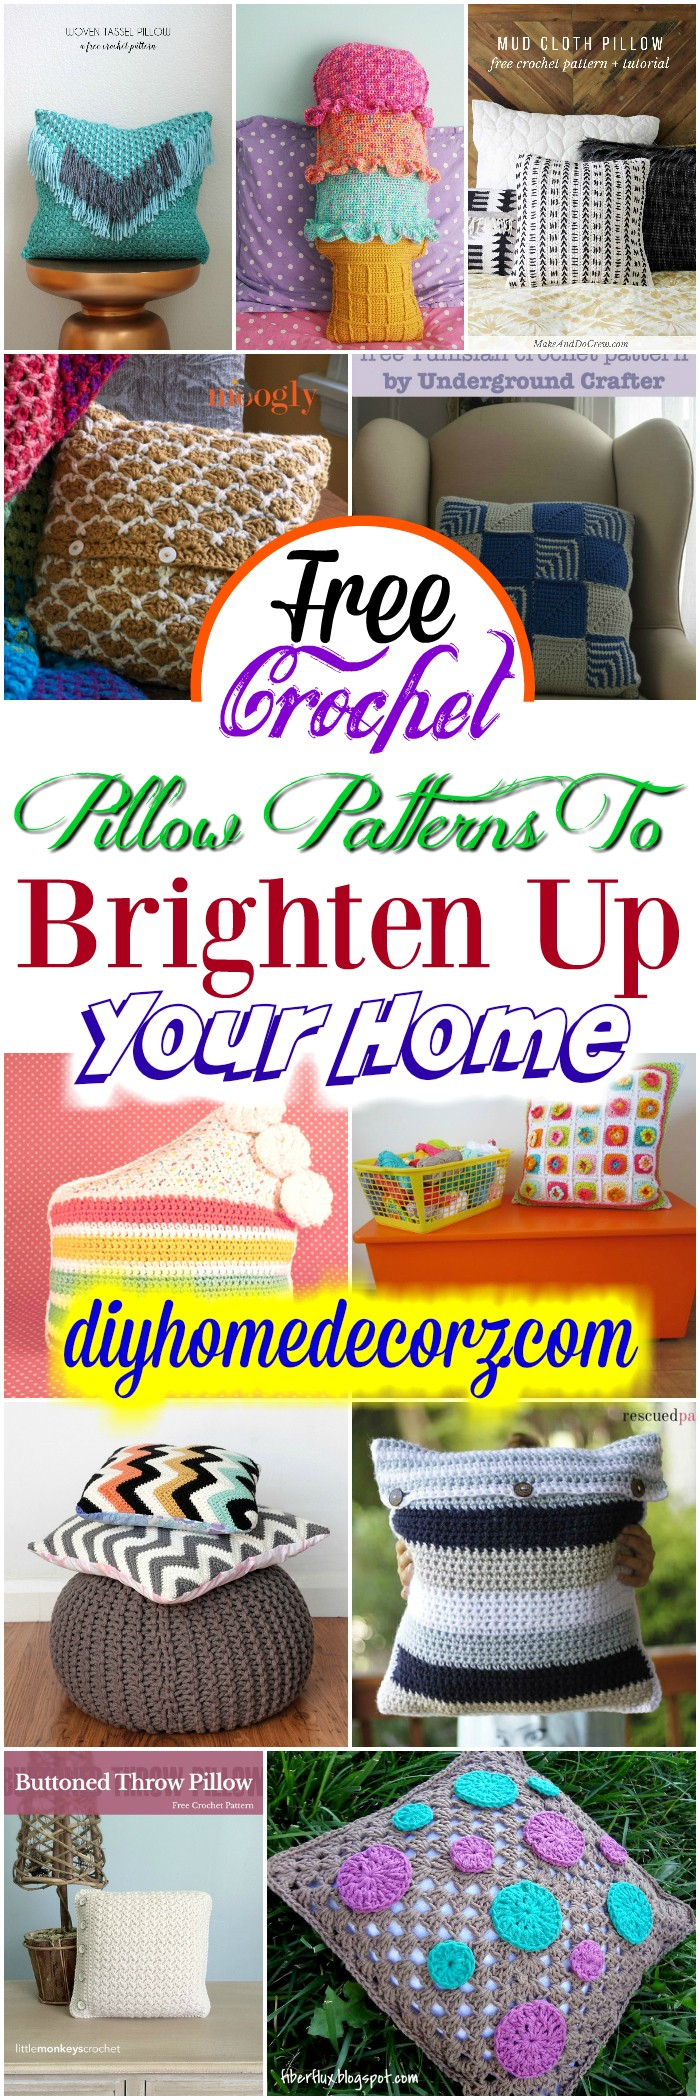 Free Crochet Pillow Patterns Free Crochet Pillow Patterns To Brighten Up Your Home Diy Home Decor